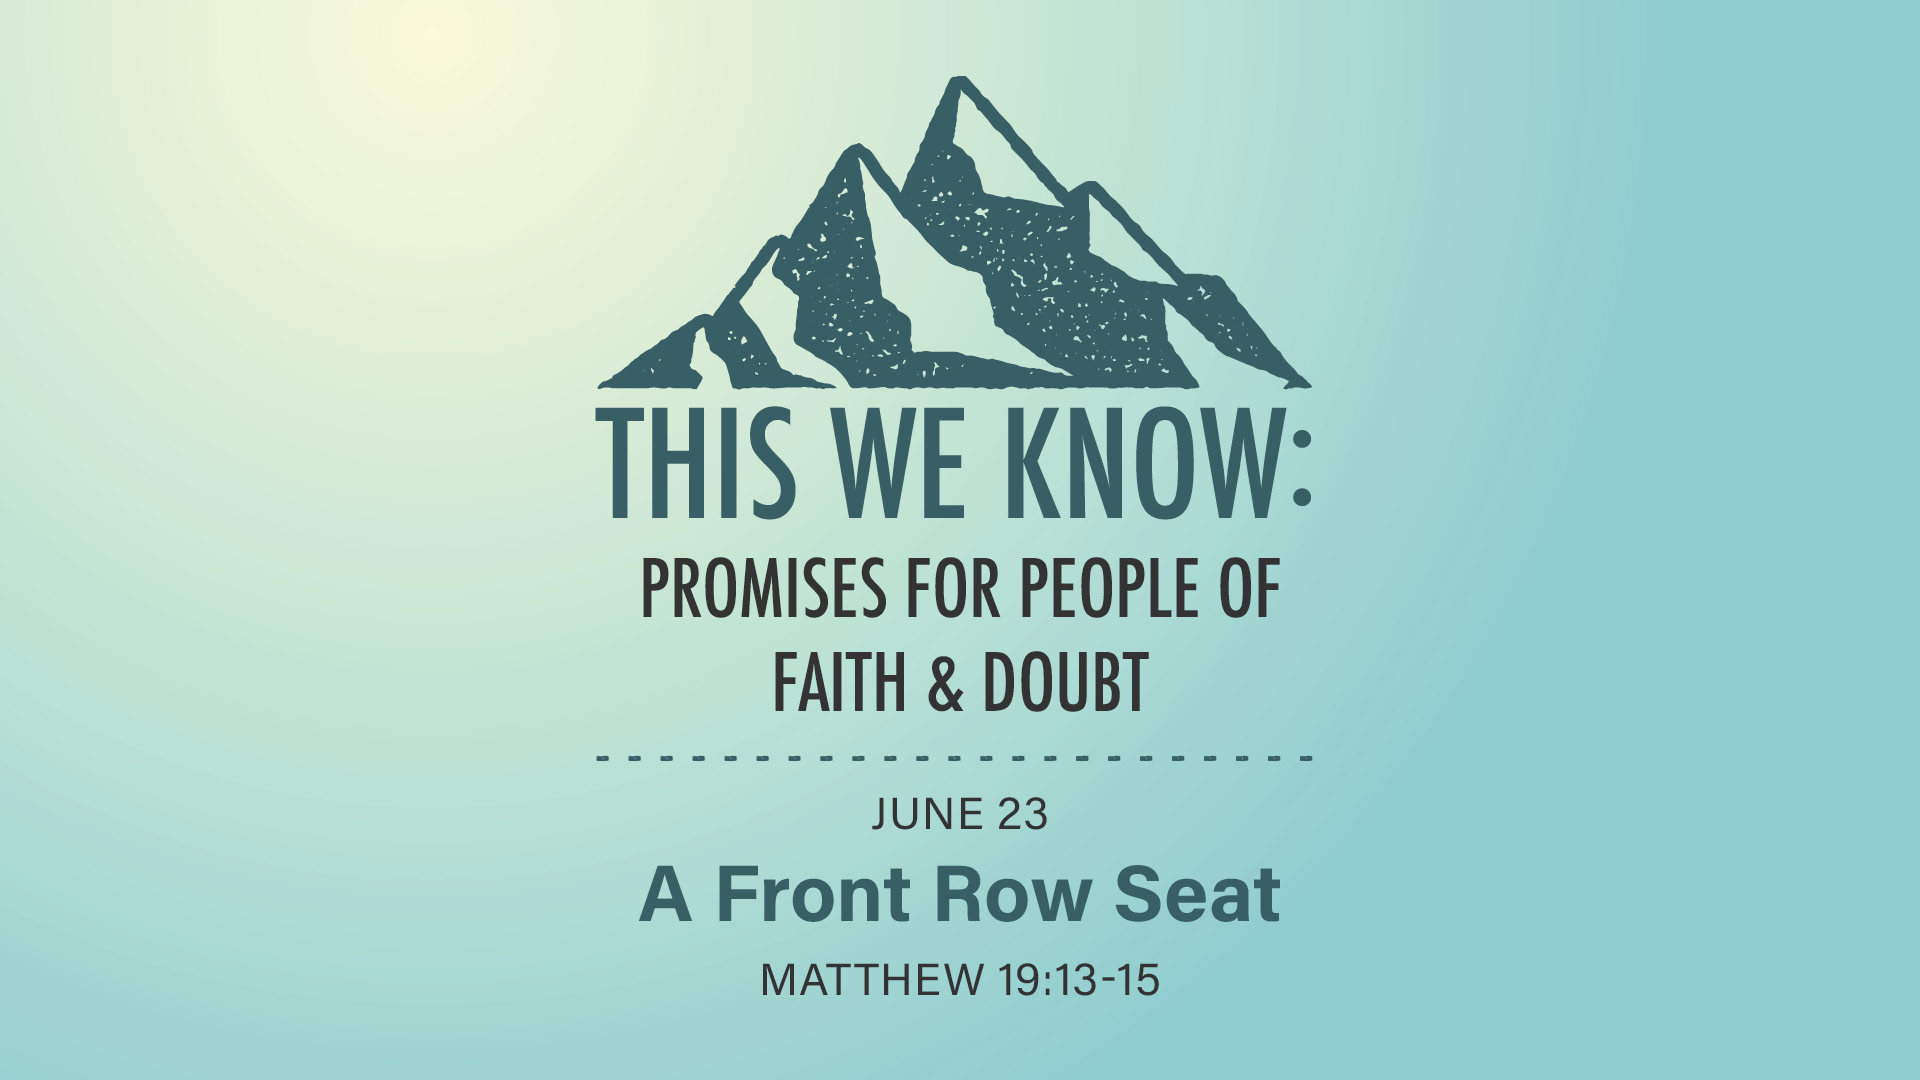 June 23 - This We Know: Promises for People of Faith & Doubt: A Front Row Seat